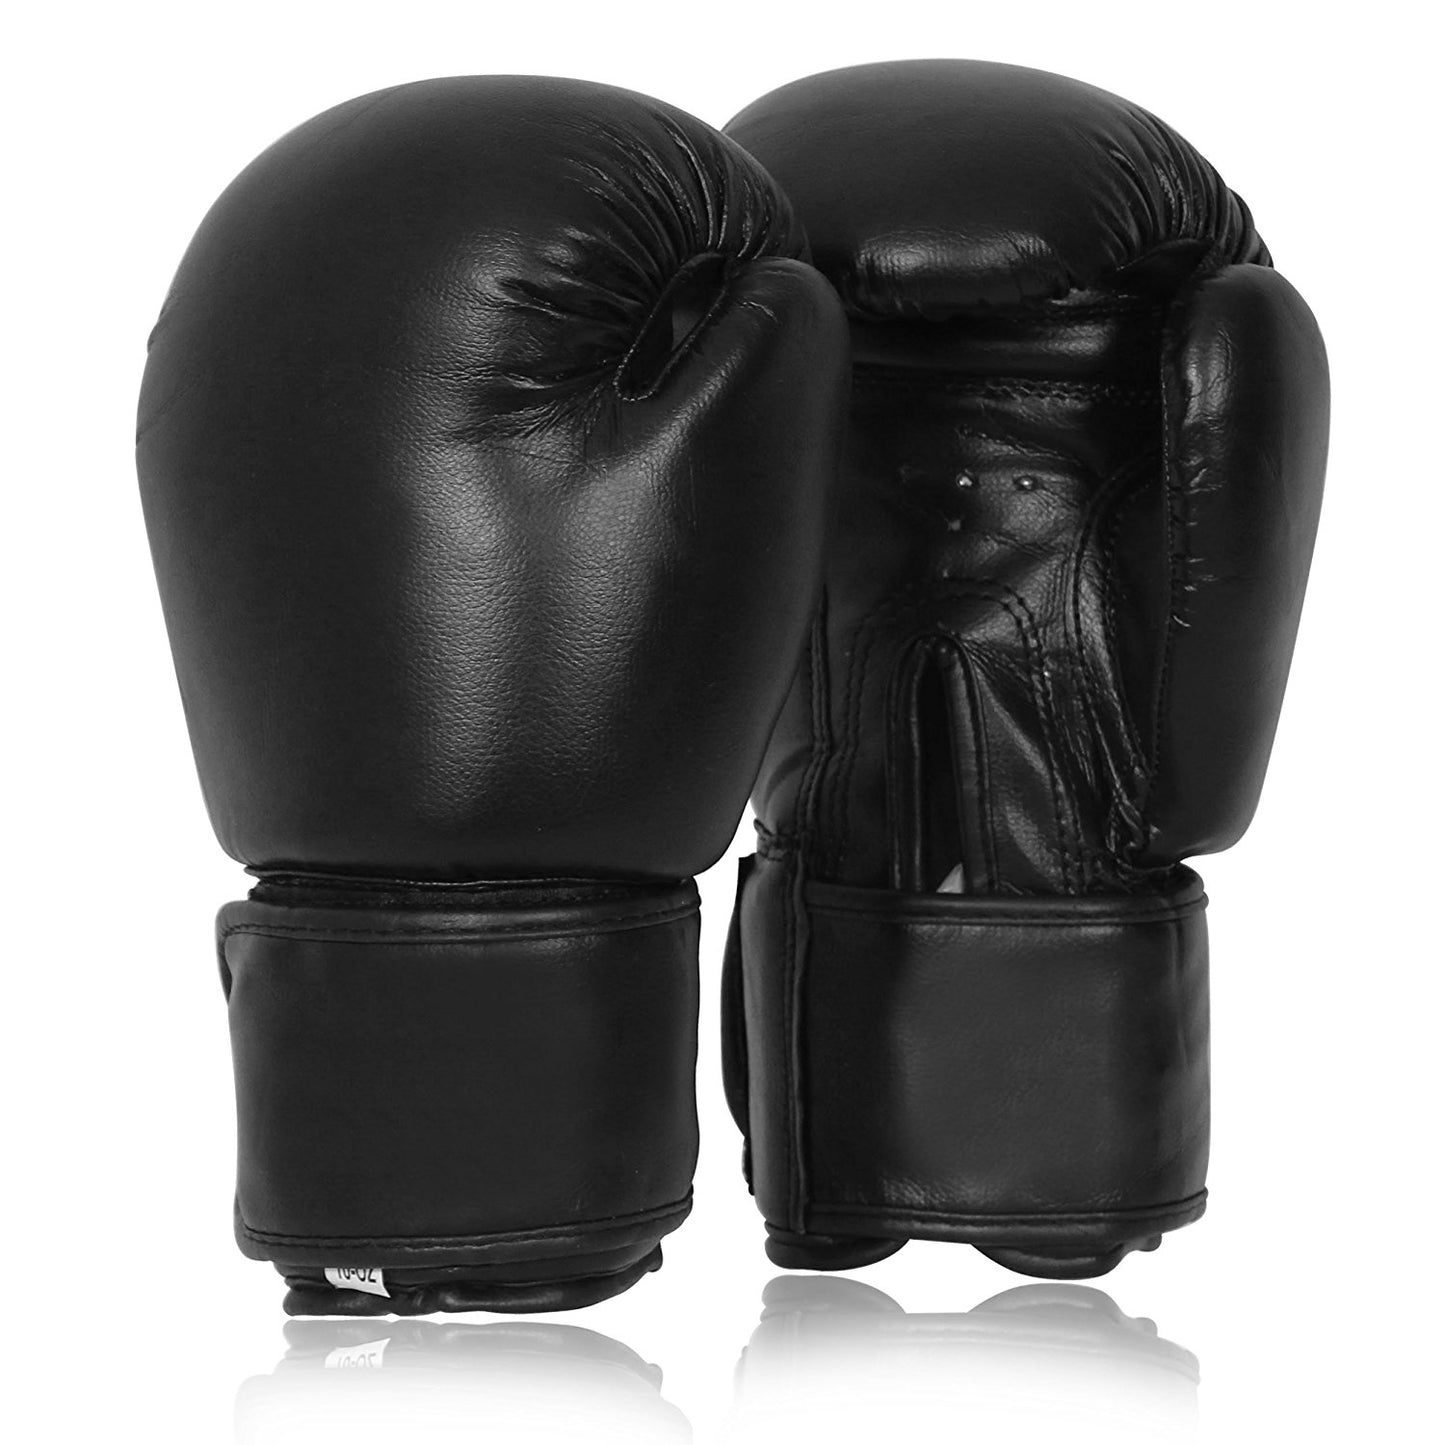 Boxing Gloves / Sparring Gloves - Leather